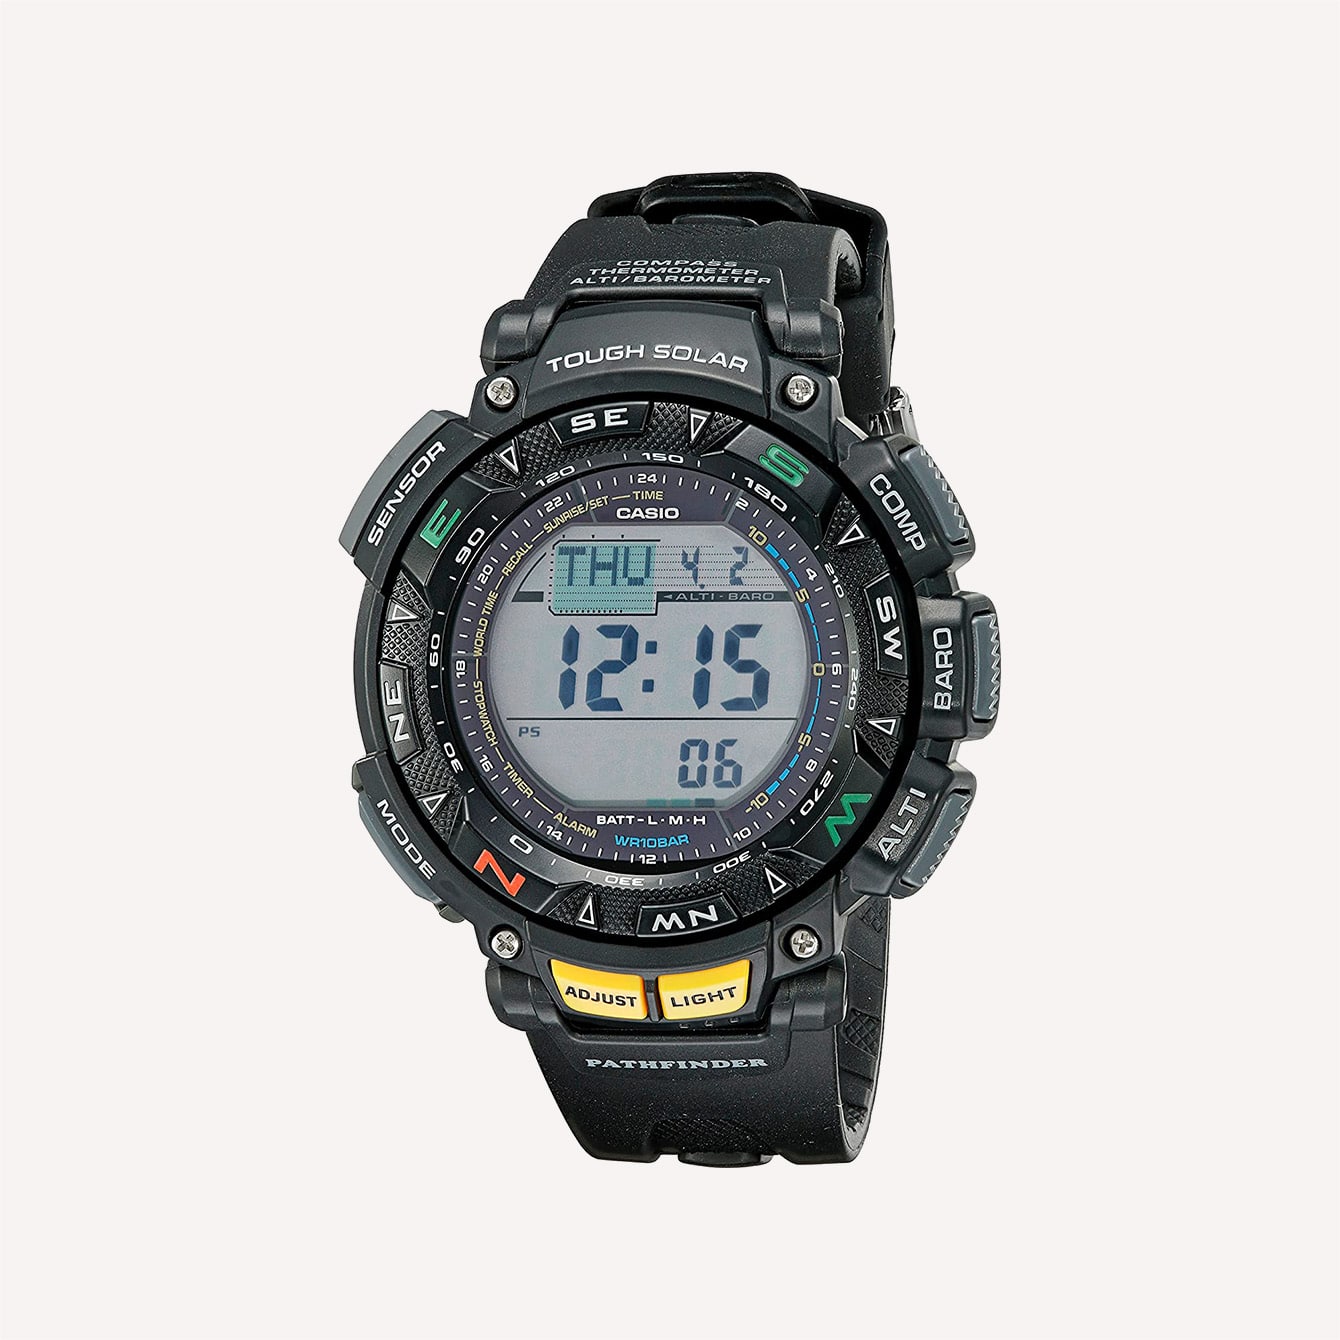 Casio PAG240 1CR MENS PATHFINDER Digital Quartz Watch with Resin Strap PAG240 1CR